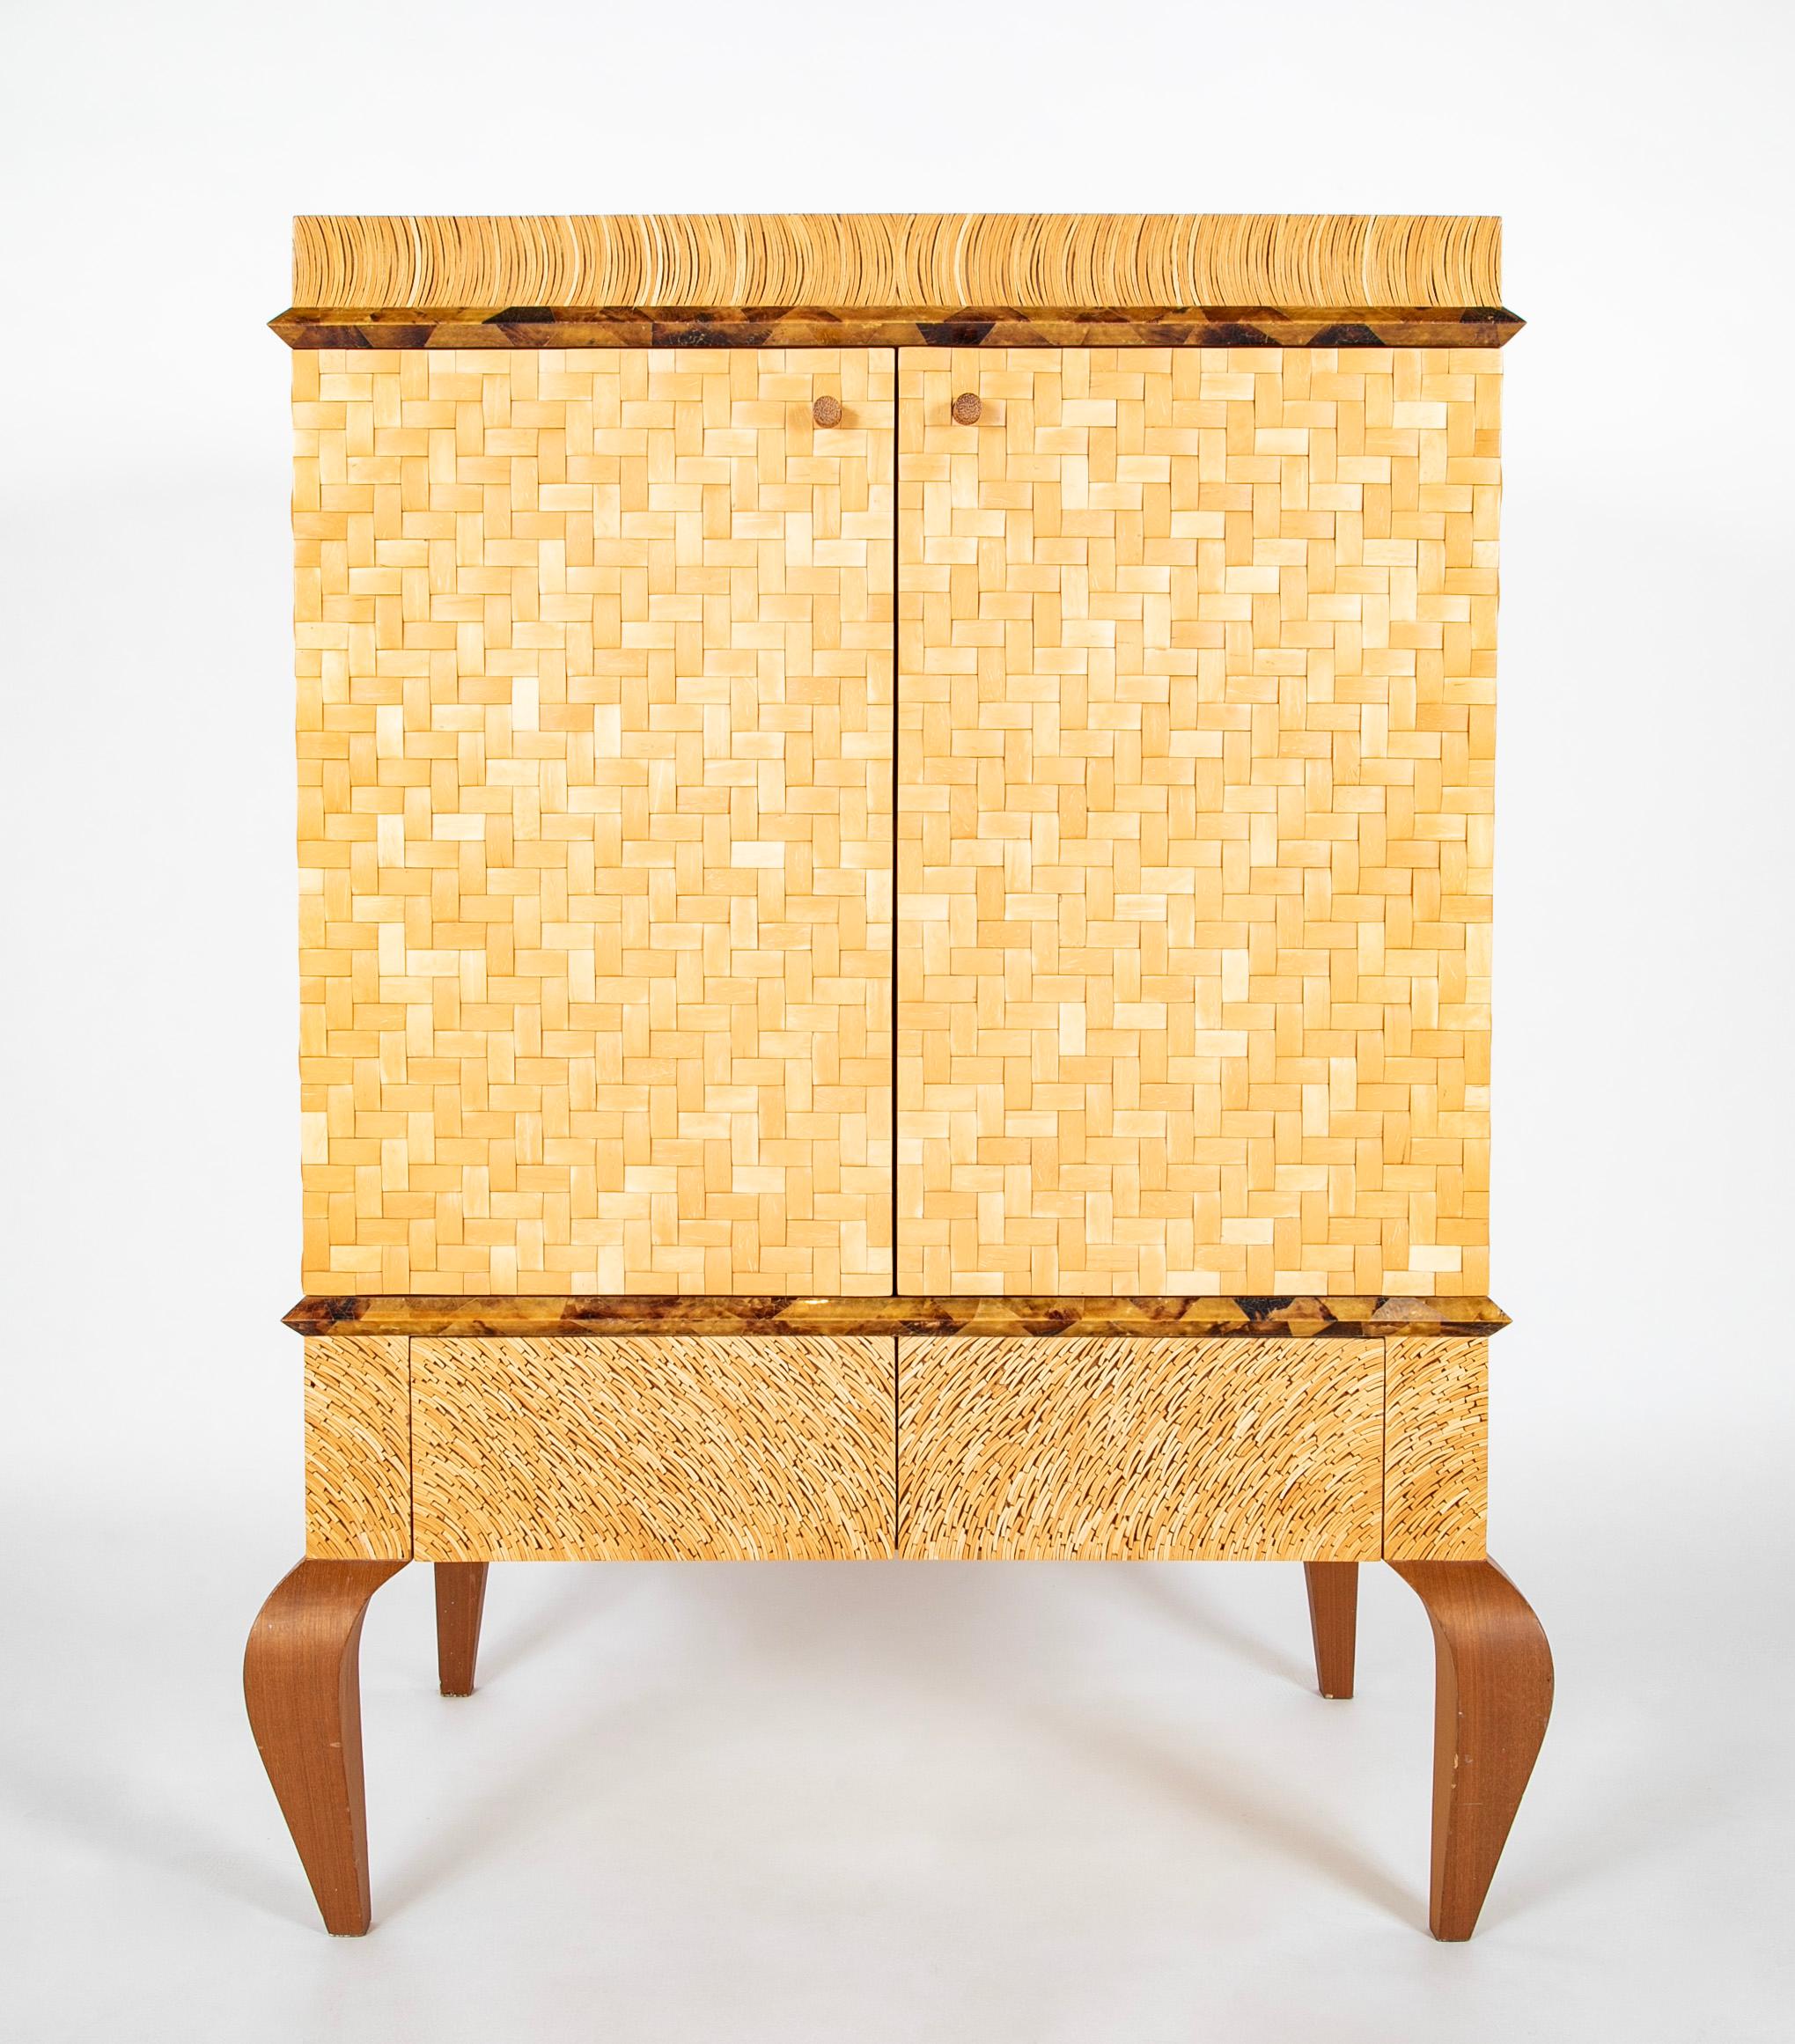 Absolutely stunning two door cabinet made with a array of natural materials, wove bamboo doors and sides, sliced lacquered bamboo top and drawers, with eggshell lacquer interior doors, pen shell trim. All supported on sculpted mahogany cabriole